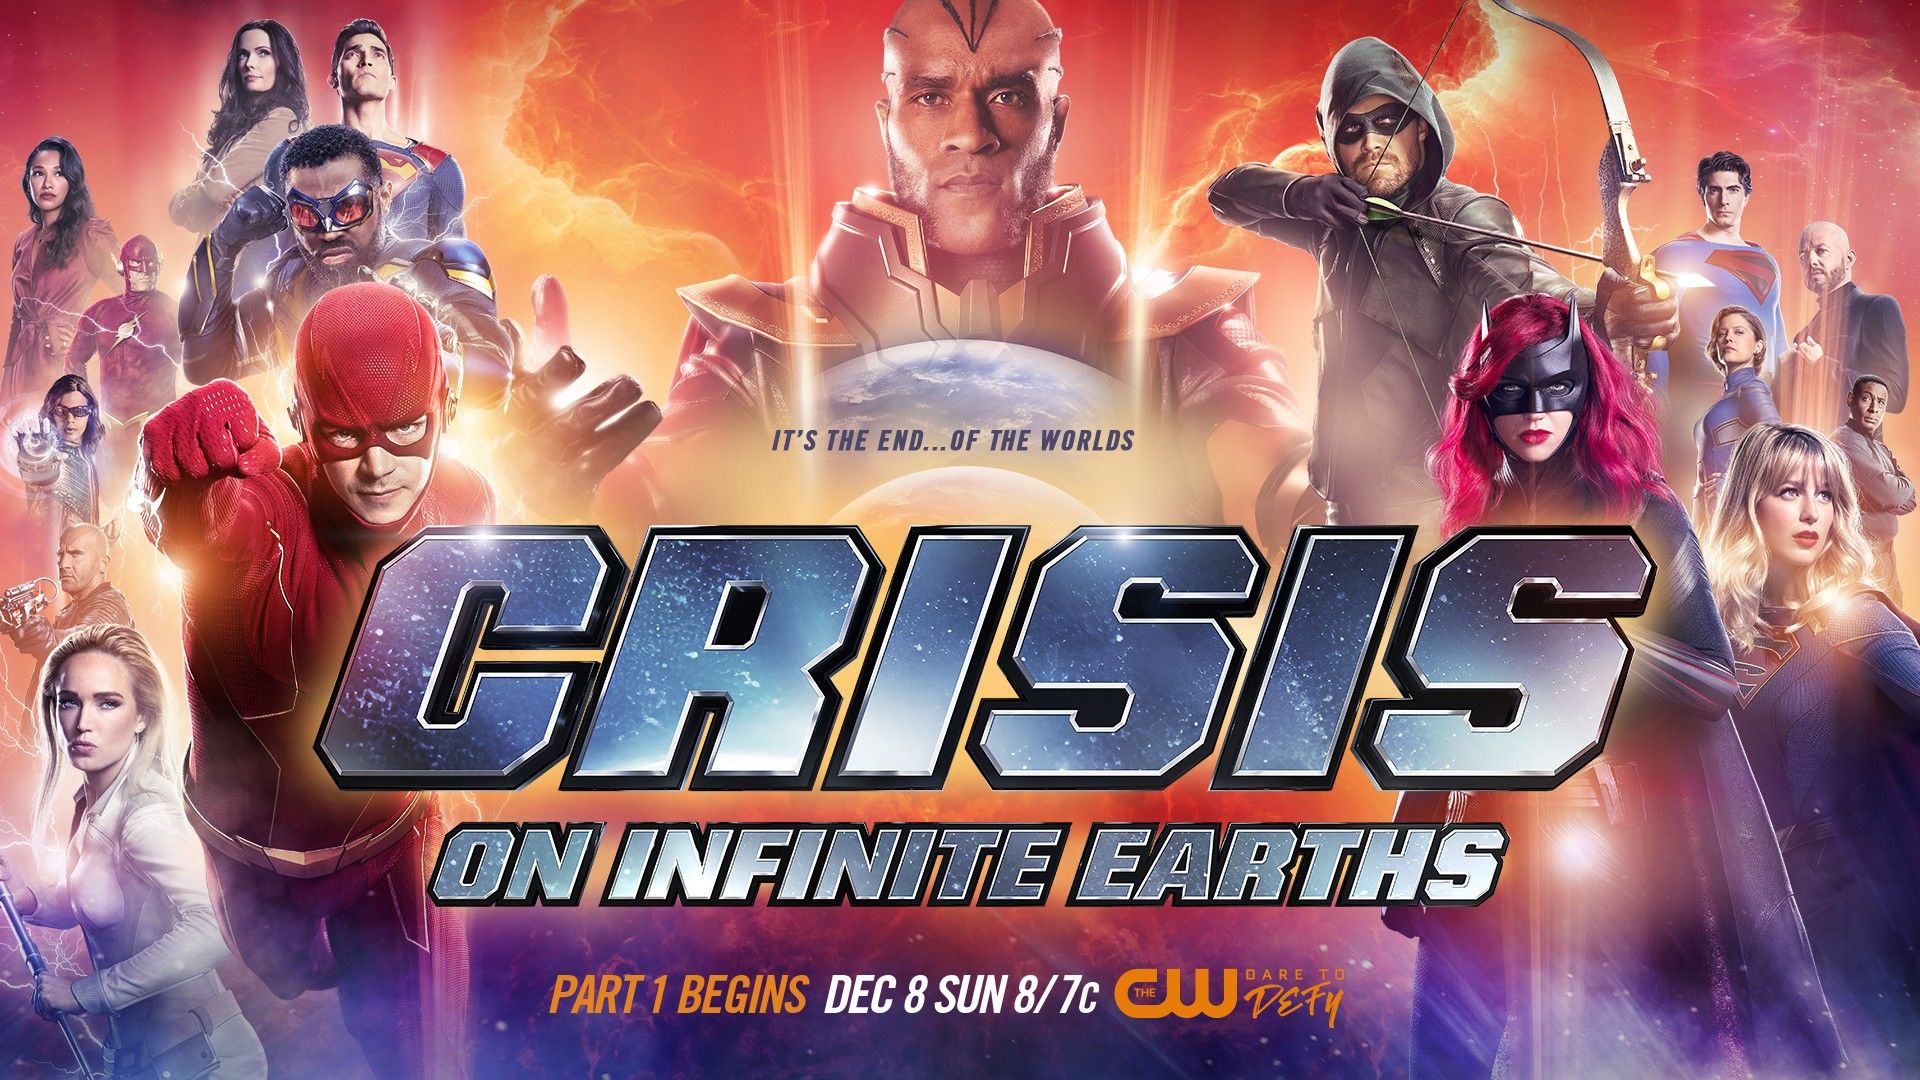 PHOTOS: Part One of Crisis on Infinite Earths crossover event